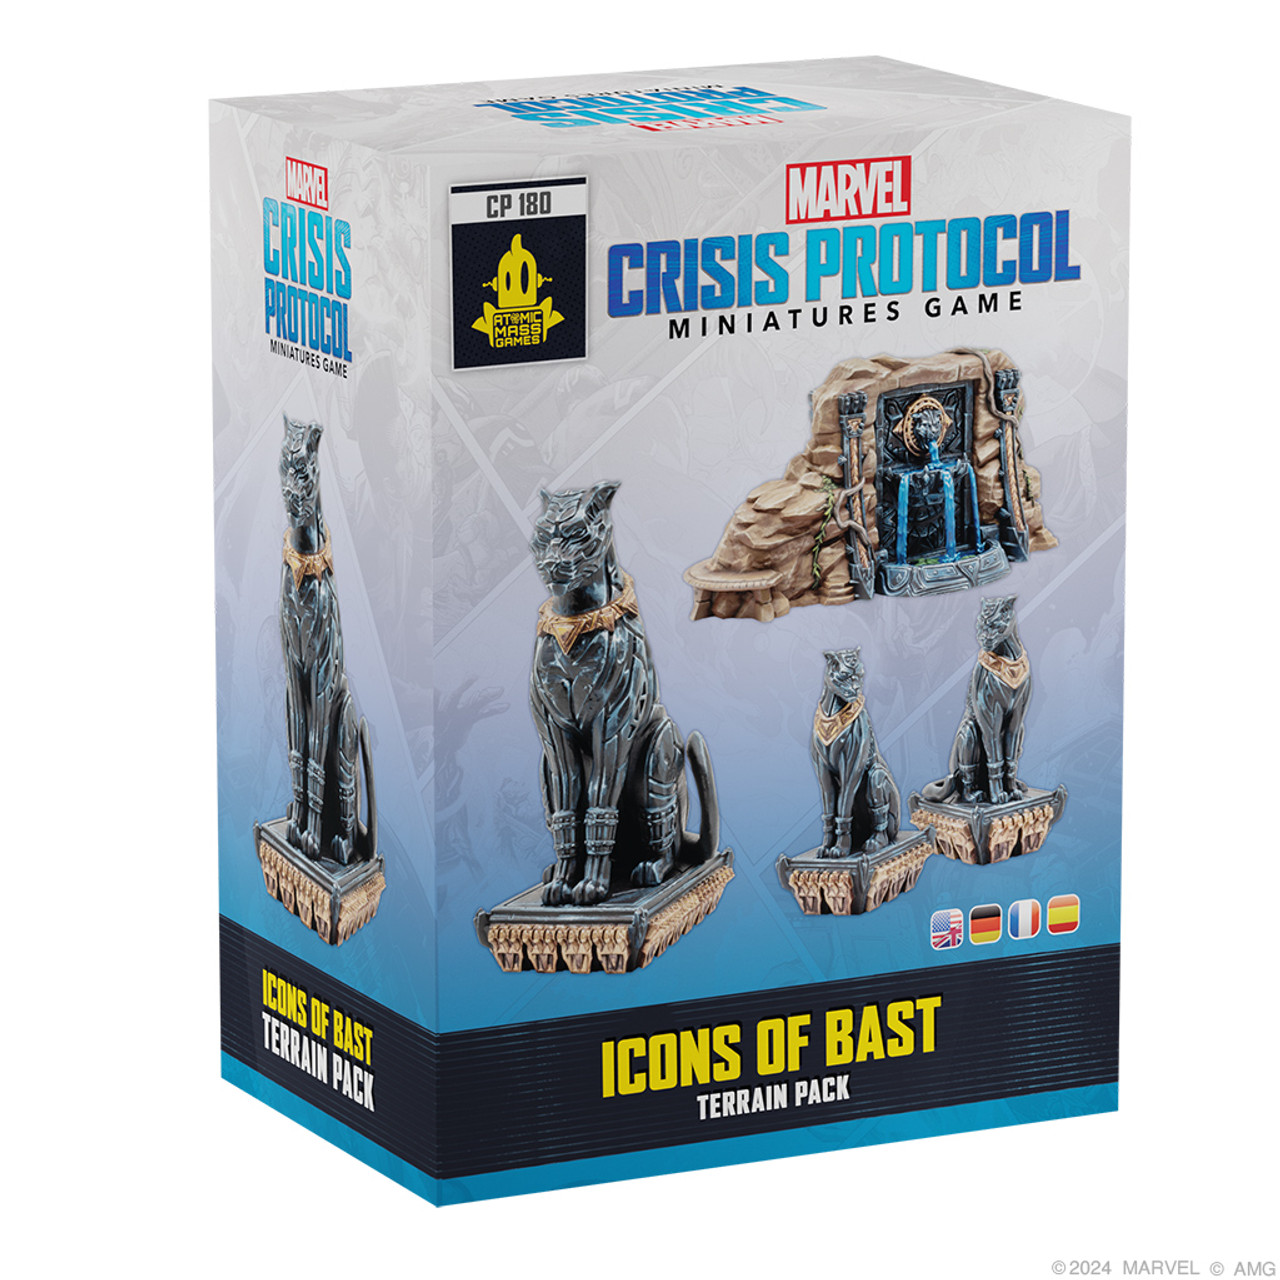 CP180 - MARVEL CRISIS PROTOCOL: ICONS OF BAST TERRAIN PACK